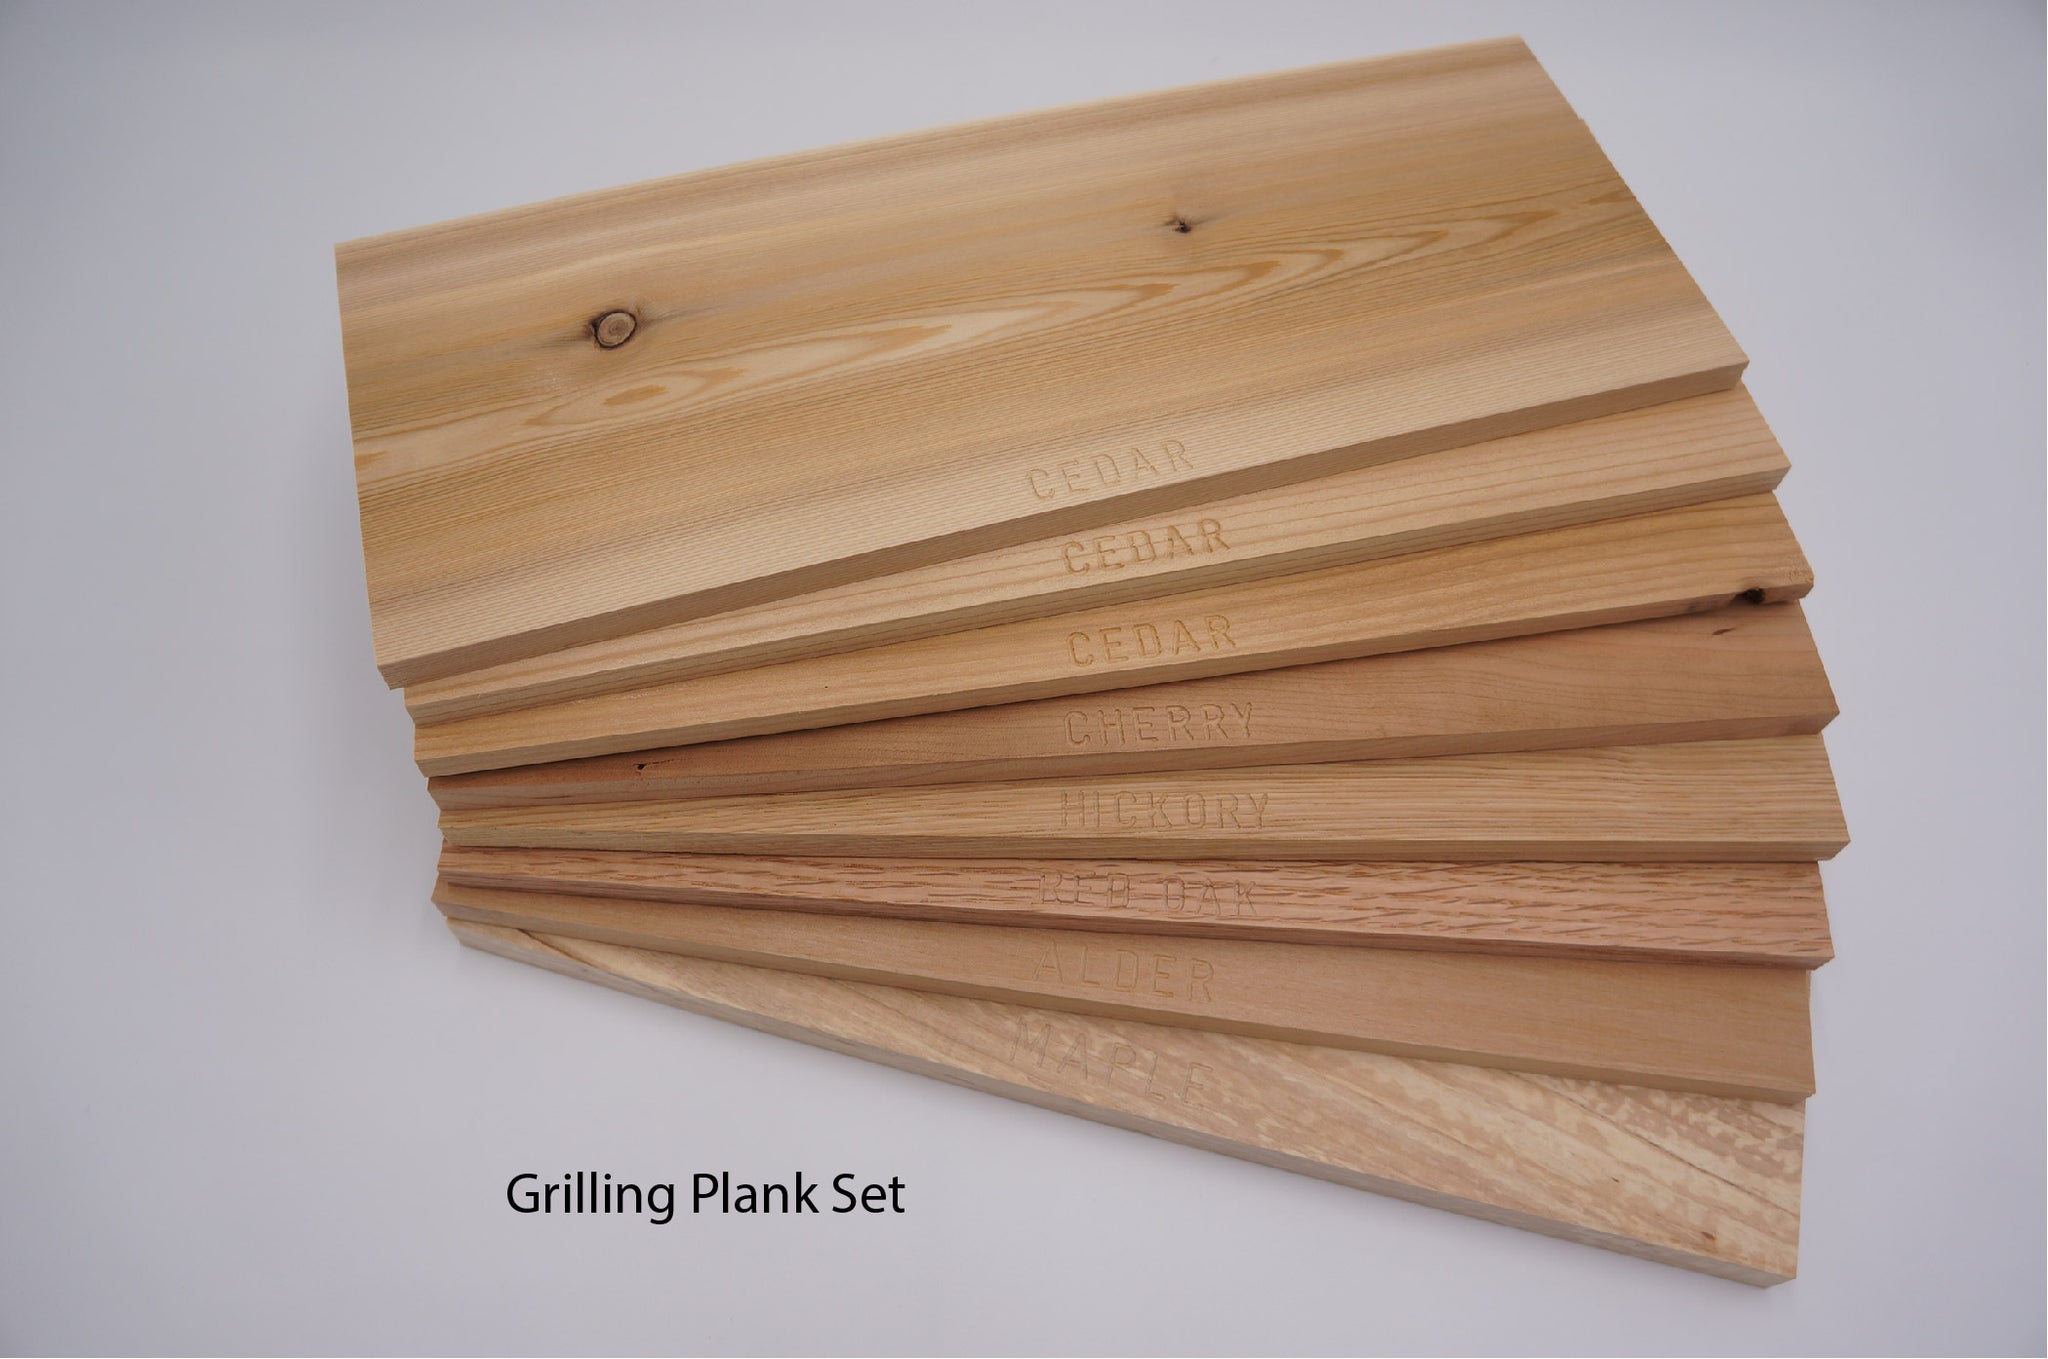 Grilling Plank Sets 5"x14"